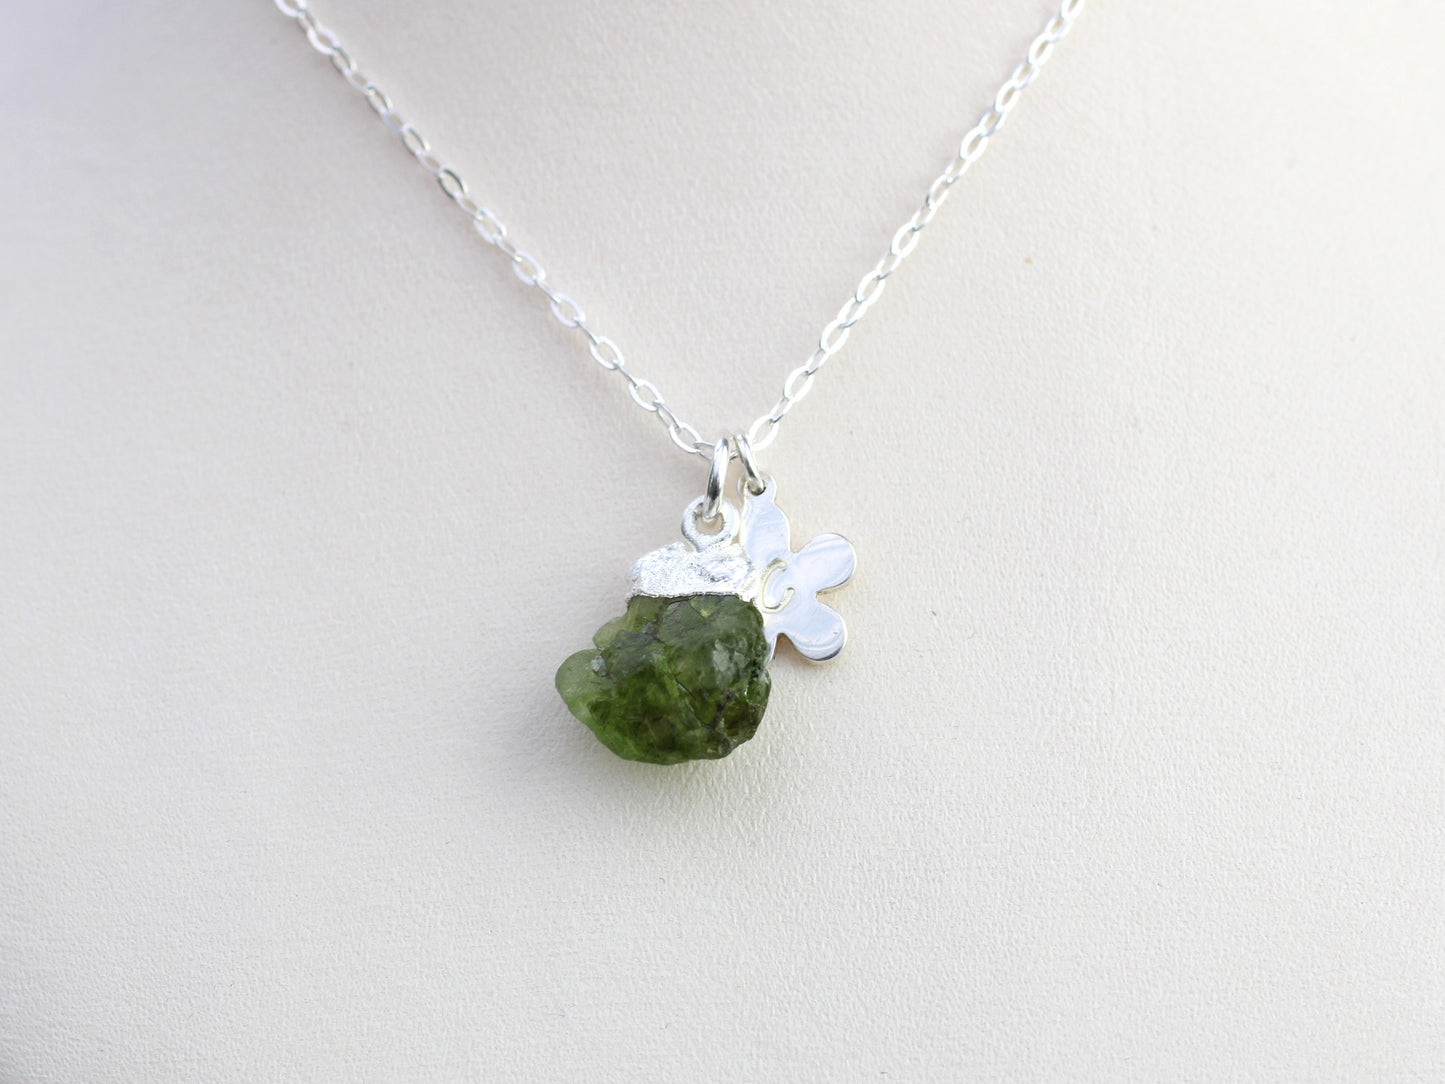 Personalised peridot necklace in silver.